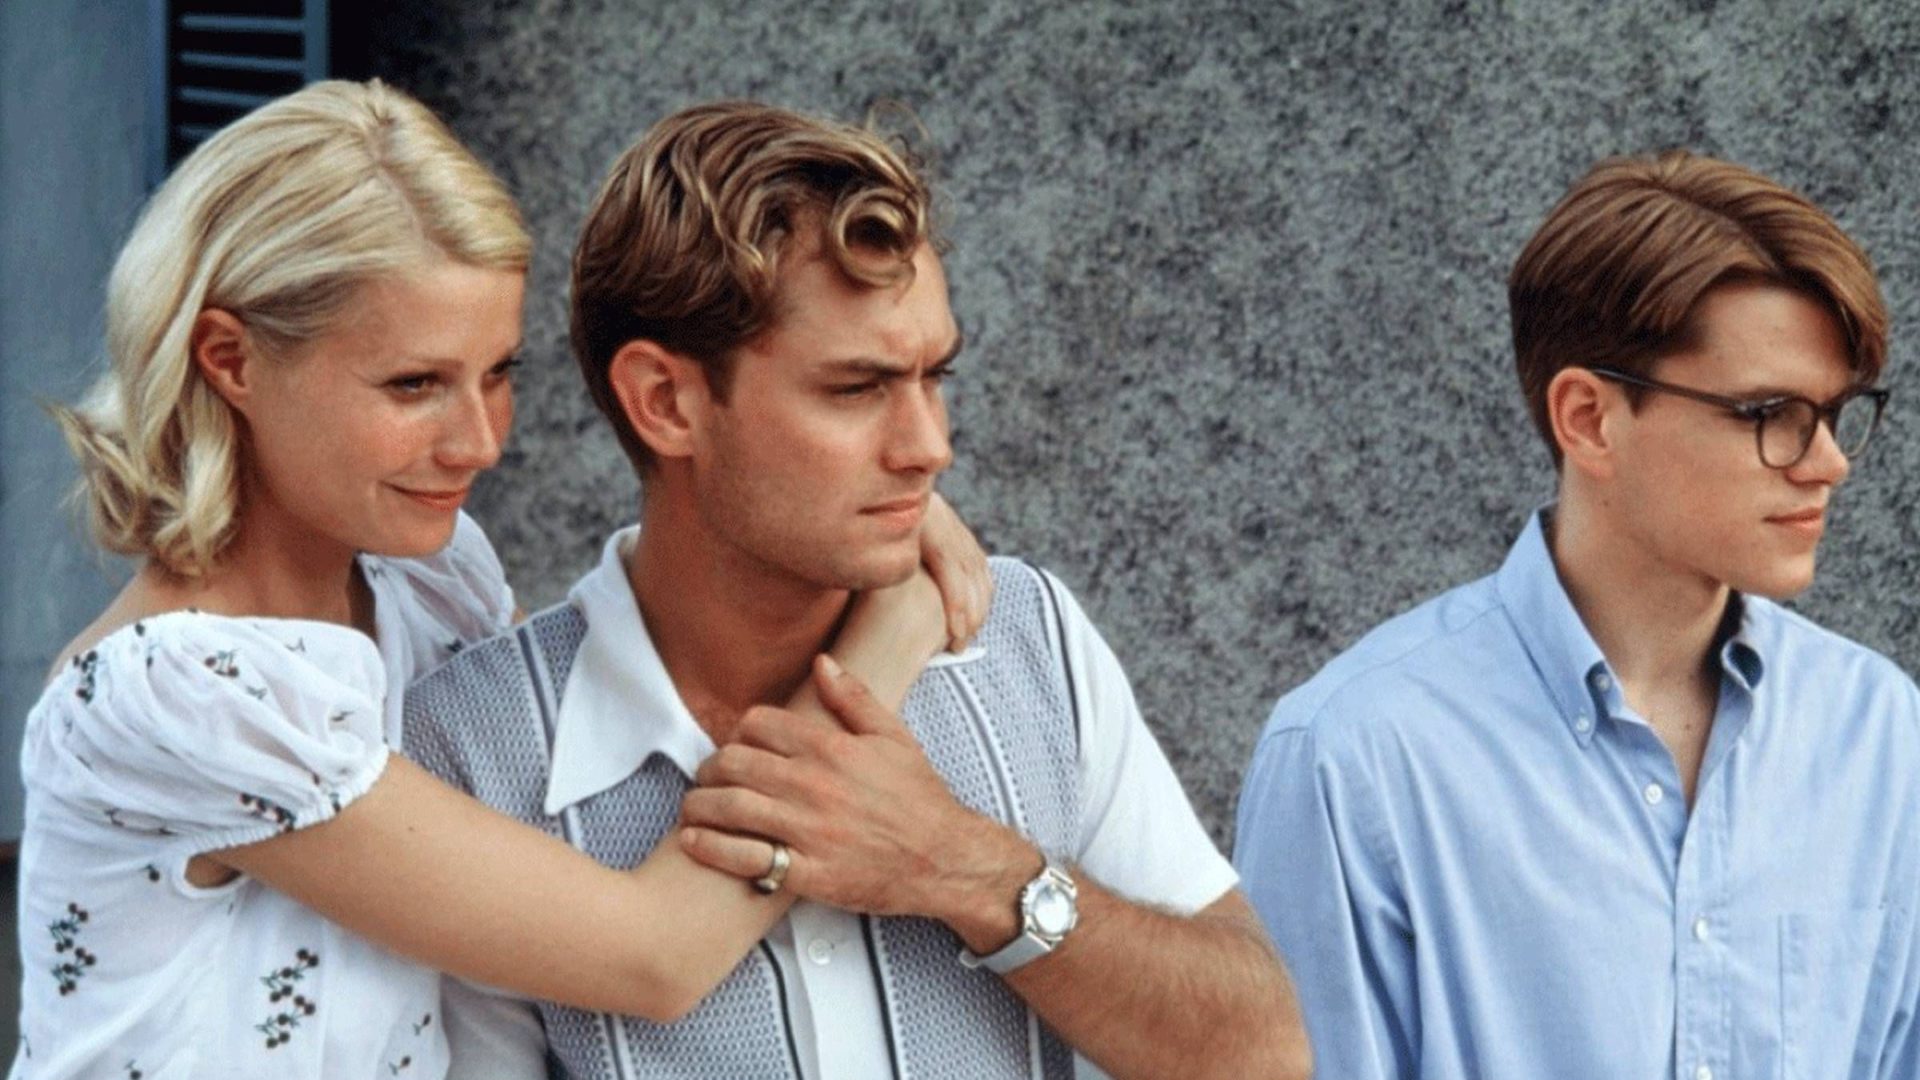 The Mysterious Yearning Secretive Sad Lonely Troubled Confused Loving  Musical Gifted Intelligent Beautiful Tender Sensitive Haunted Passionate Talented  Mr. Ripley. - Blog - The Film Experience